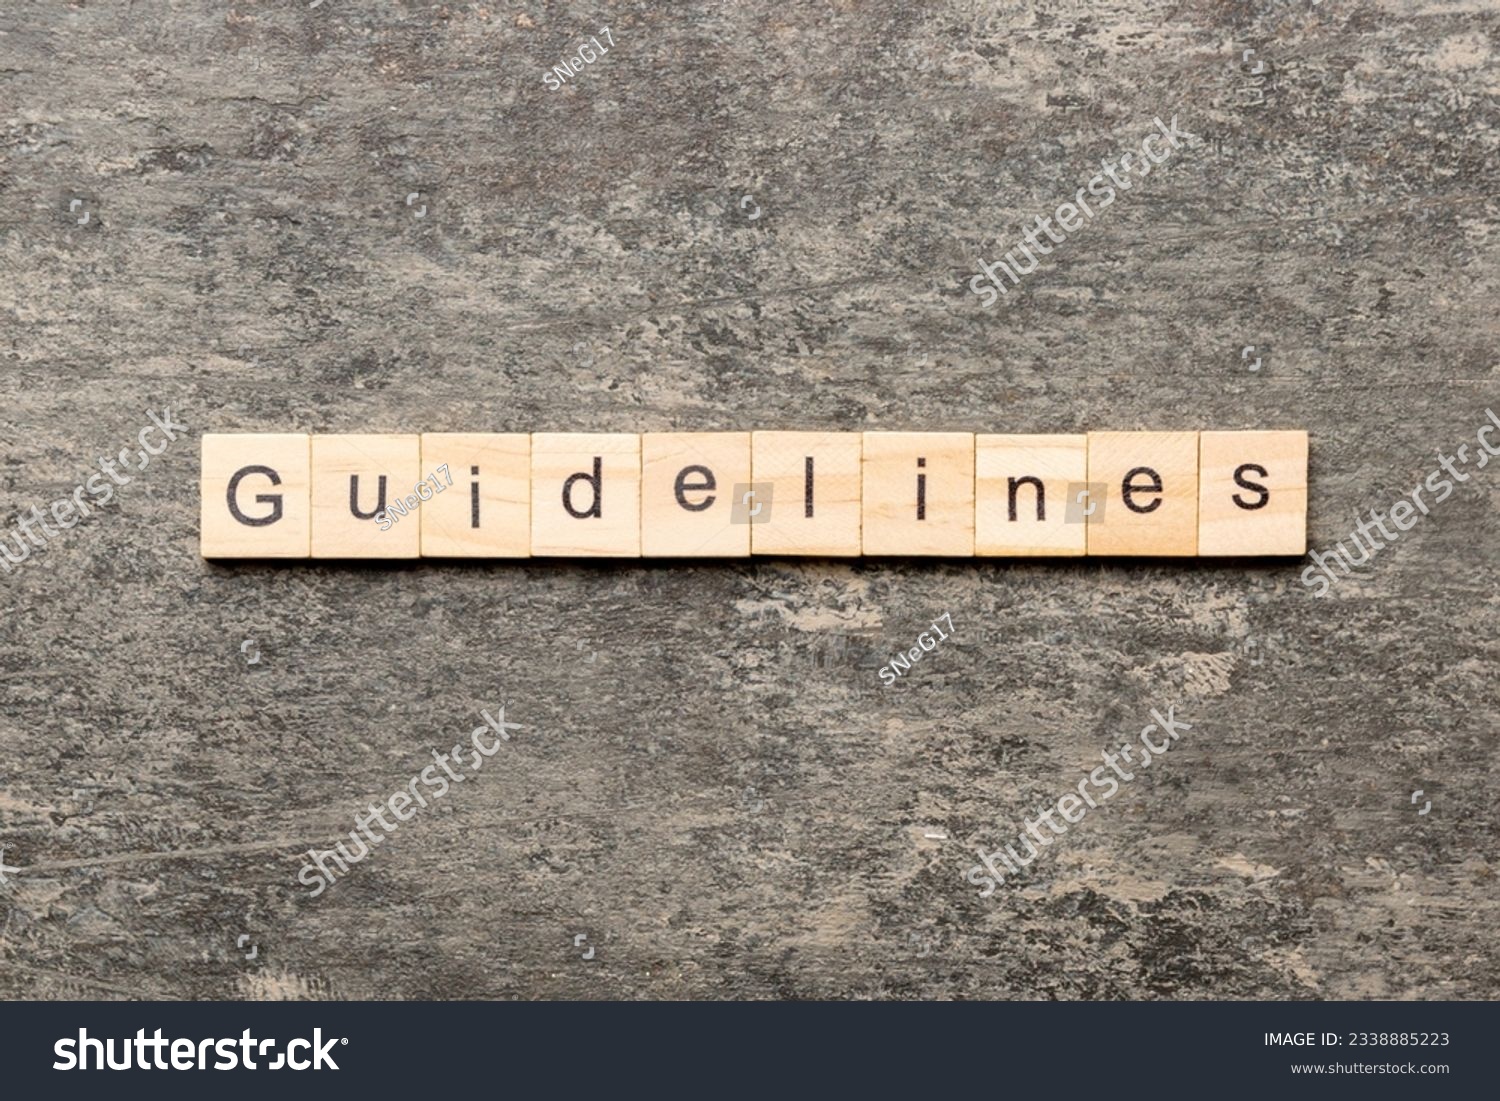 Guidelines word written on wood block. Guidelines text on table, concept. #2338885223